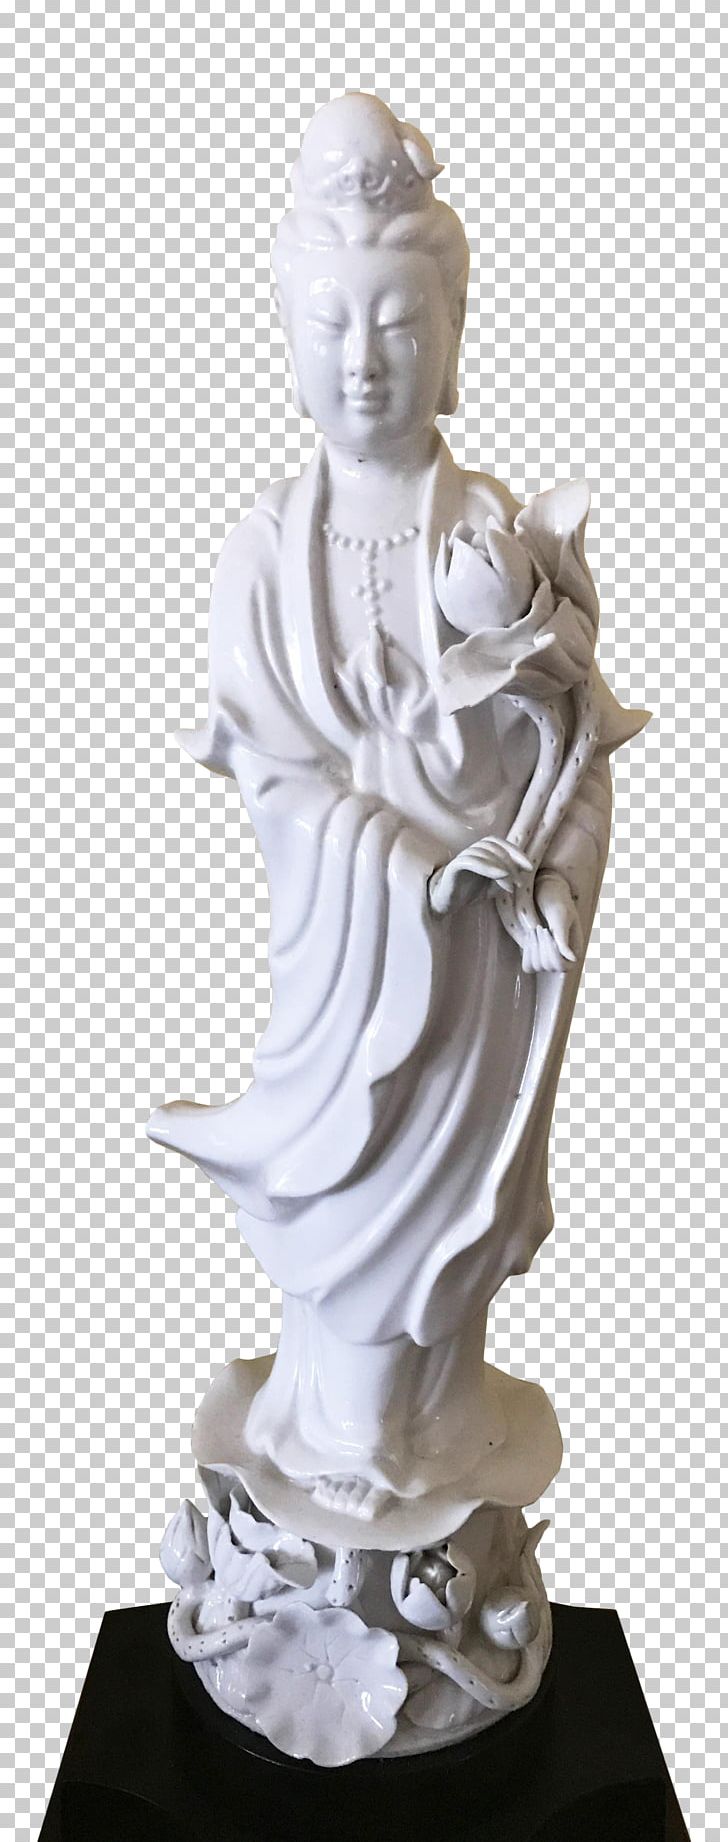 Statue Classical Sculpture Figurine Carving PNG, Clipart, Blanc, Bust, Carving, Chine, Chinese Free PNG Download